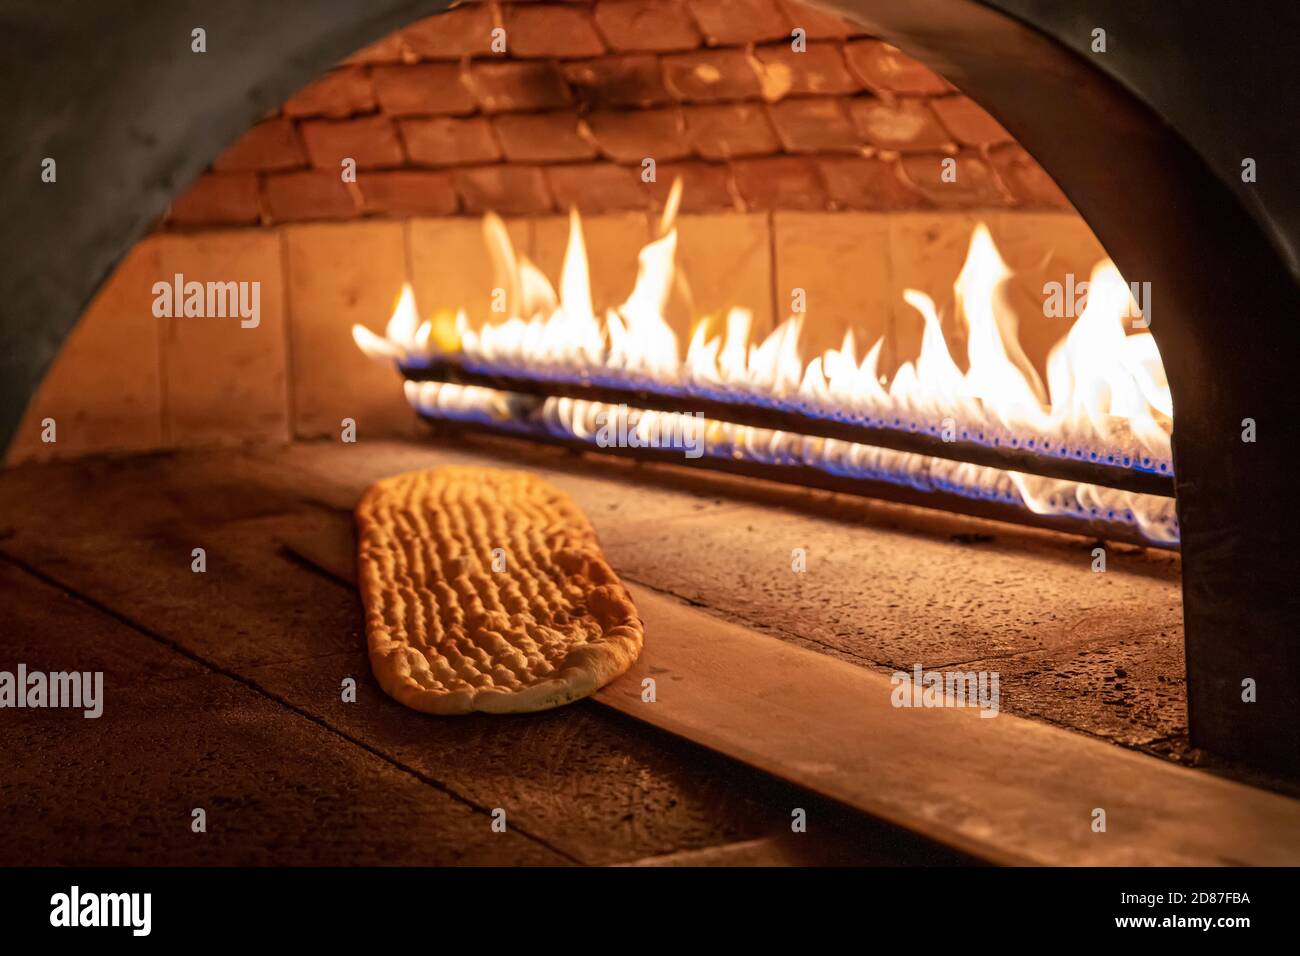 Turkish cuisine, pita bread in stone brick natural flame oven on wooden  board, fresh hot baked loaf, copy space. Bakery or bakehouse concept image  Stock Photo - Alamy